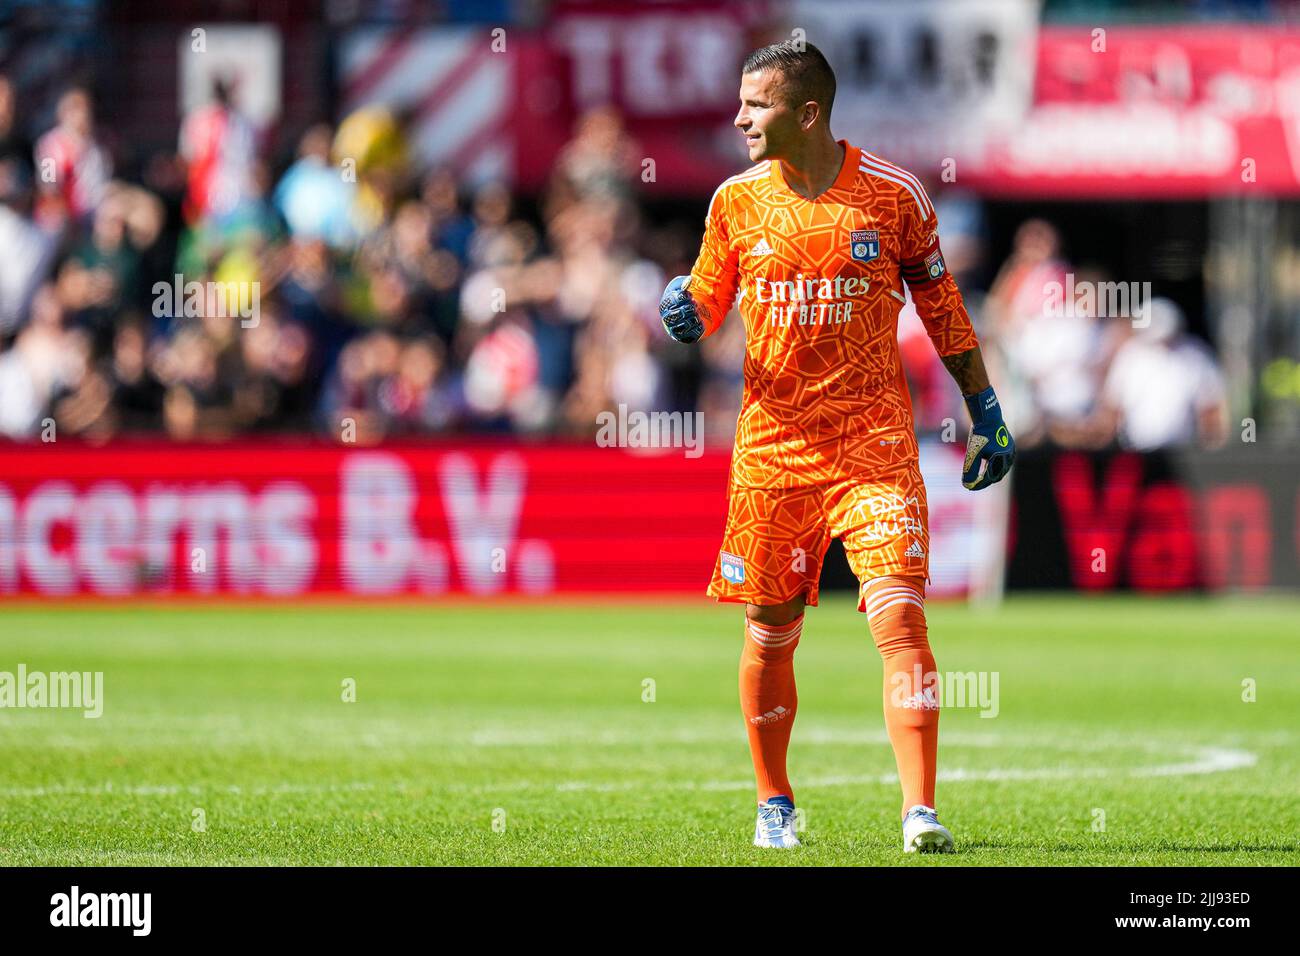 Rotterdam, Netherlands. 24 July 2022, Rotterdam - Olympique Lyon keeper Anthony Lopes celebrates the 0-1 during the match between Feyenoord v Olympique Lyon at Stadion Feijenoord De Kuip on 24 July 2022 in Rotterdam, Netherlands. (Box to Box Pictures/Yannick Verhoeven) Stock Photo